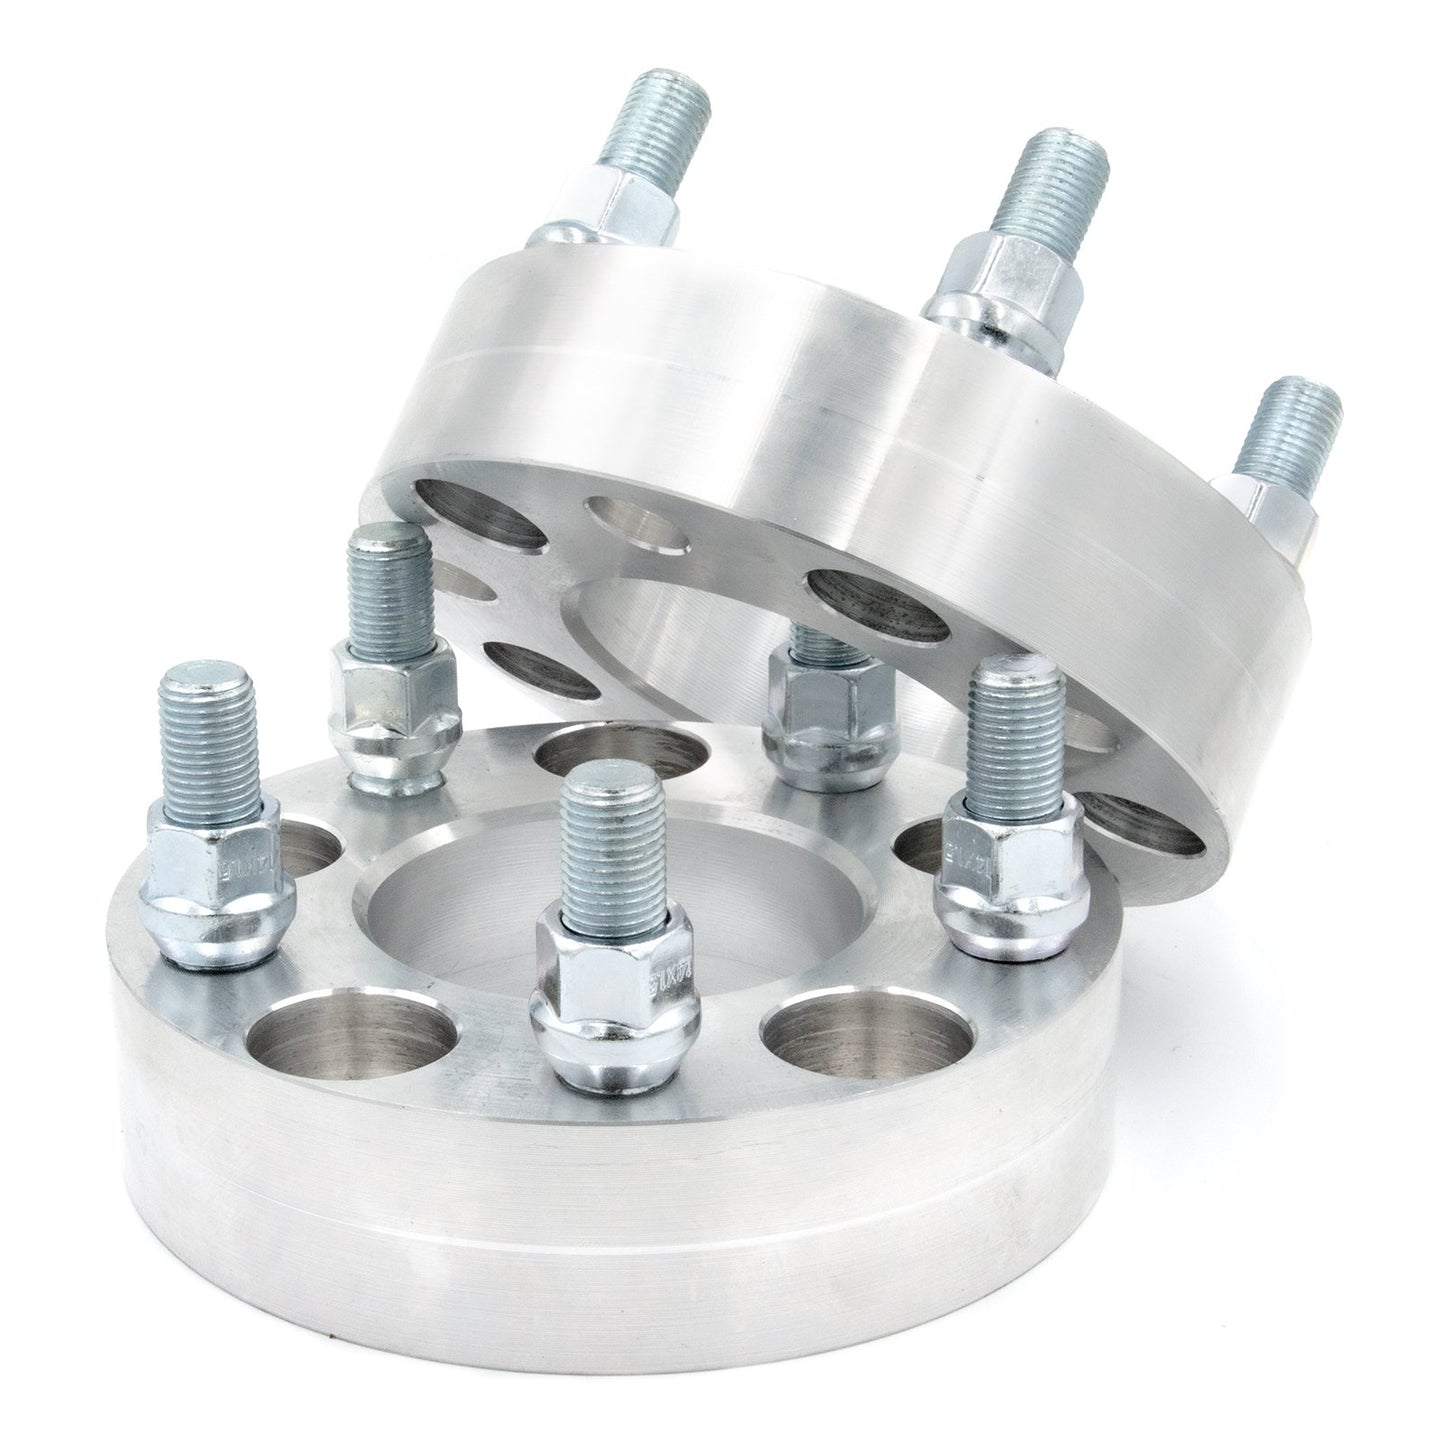 5x5" to 5x100 Wheel Spacer/Adapter - Thickness: 3/4"- 4"